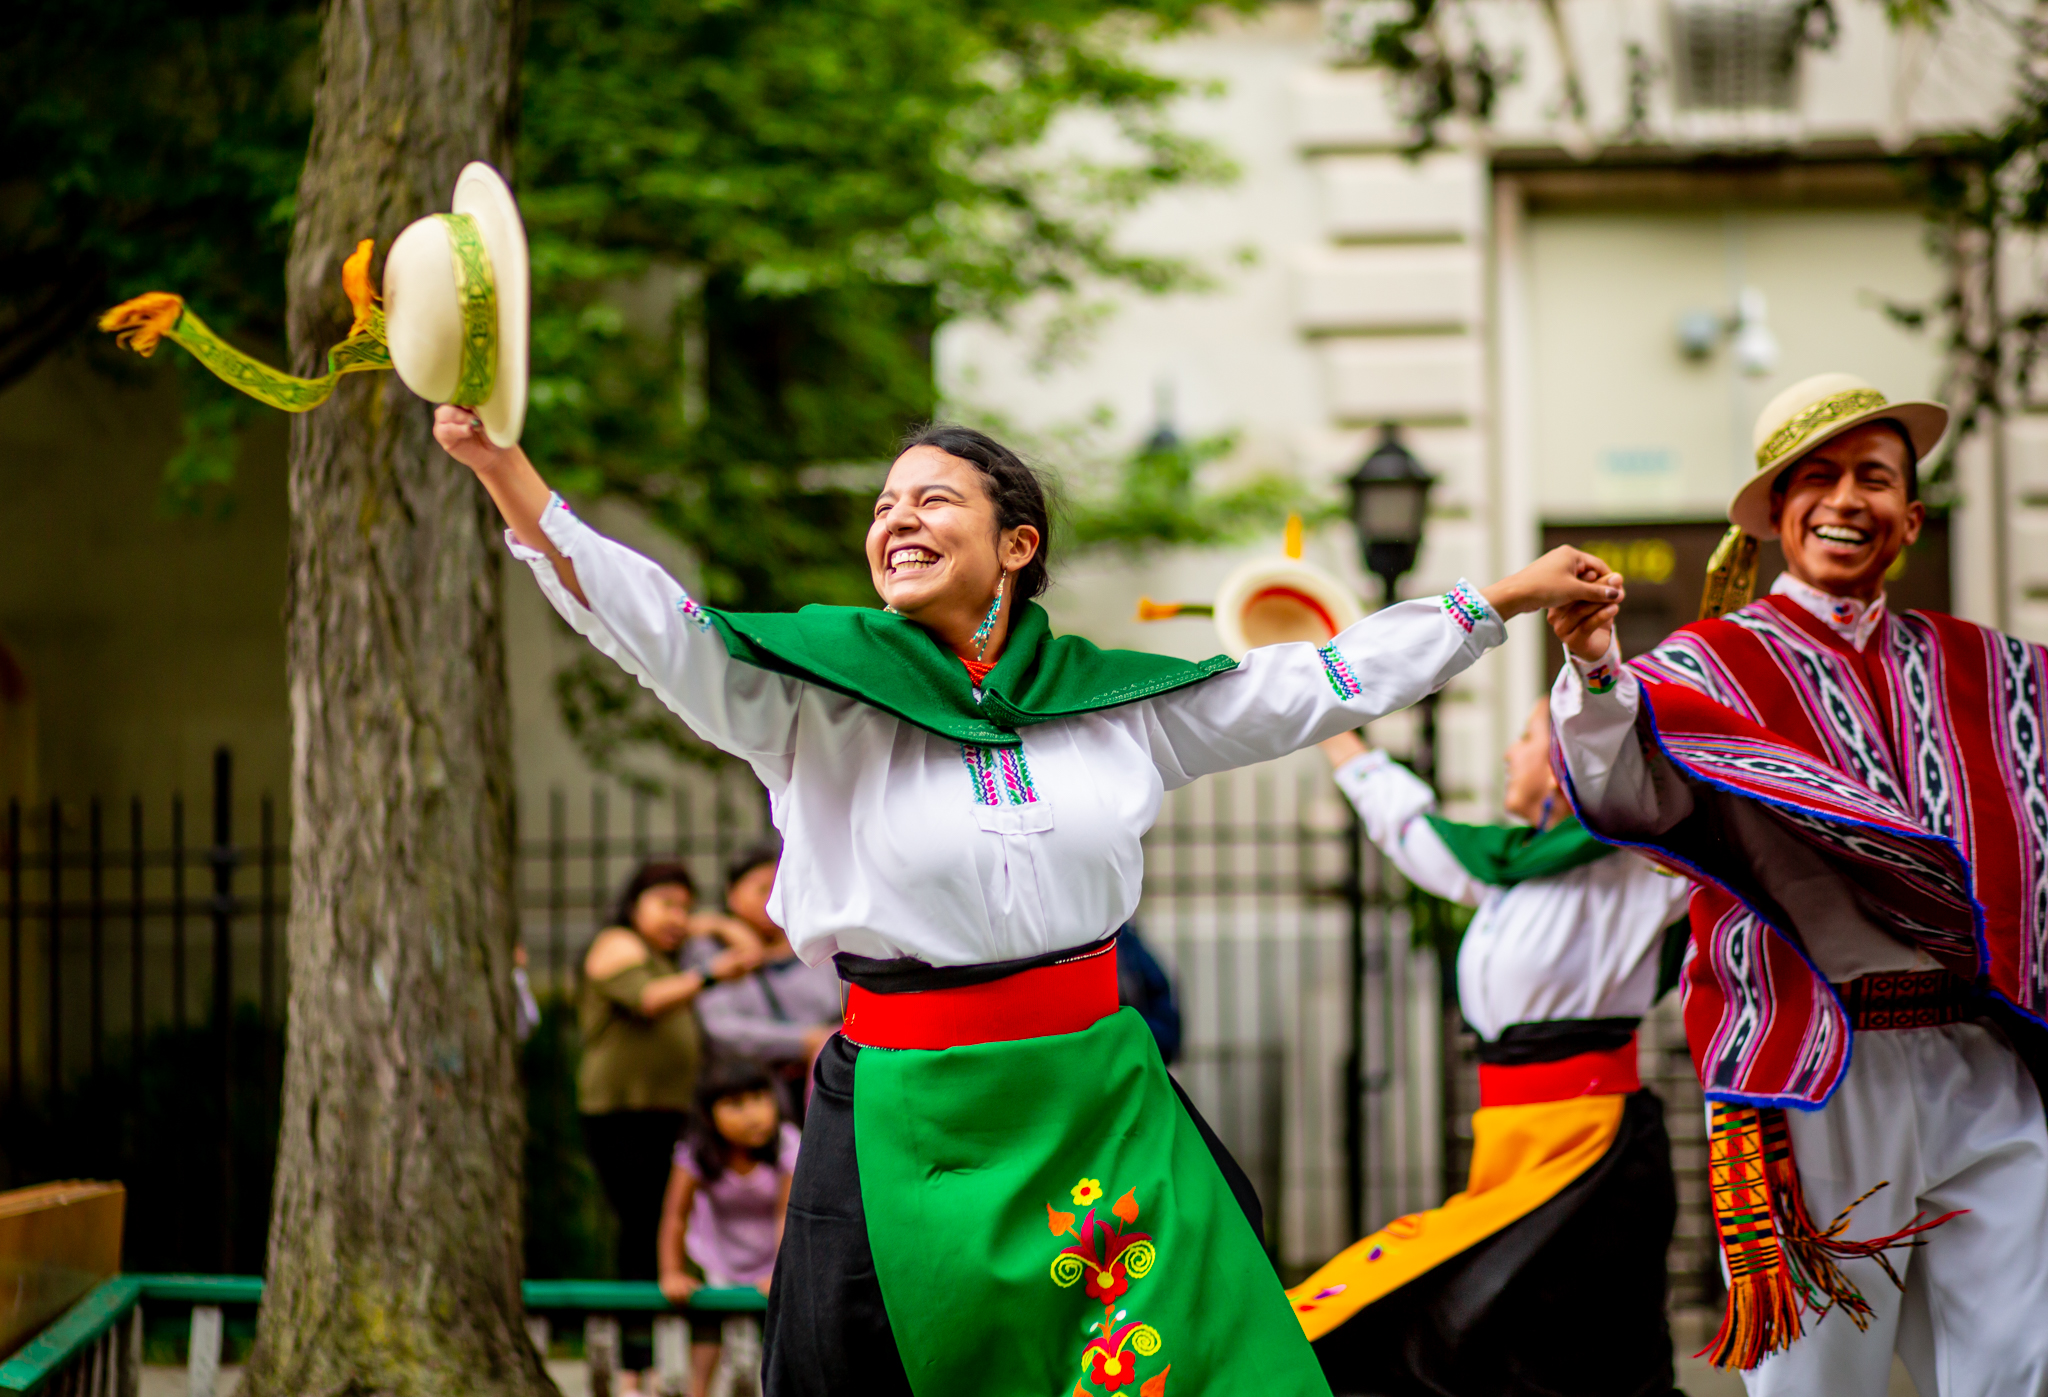 Ecuadorian dancer in white and green smiling and holding hat